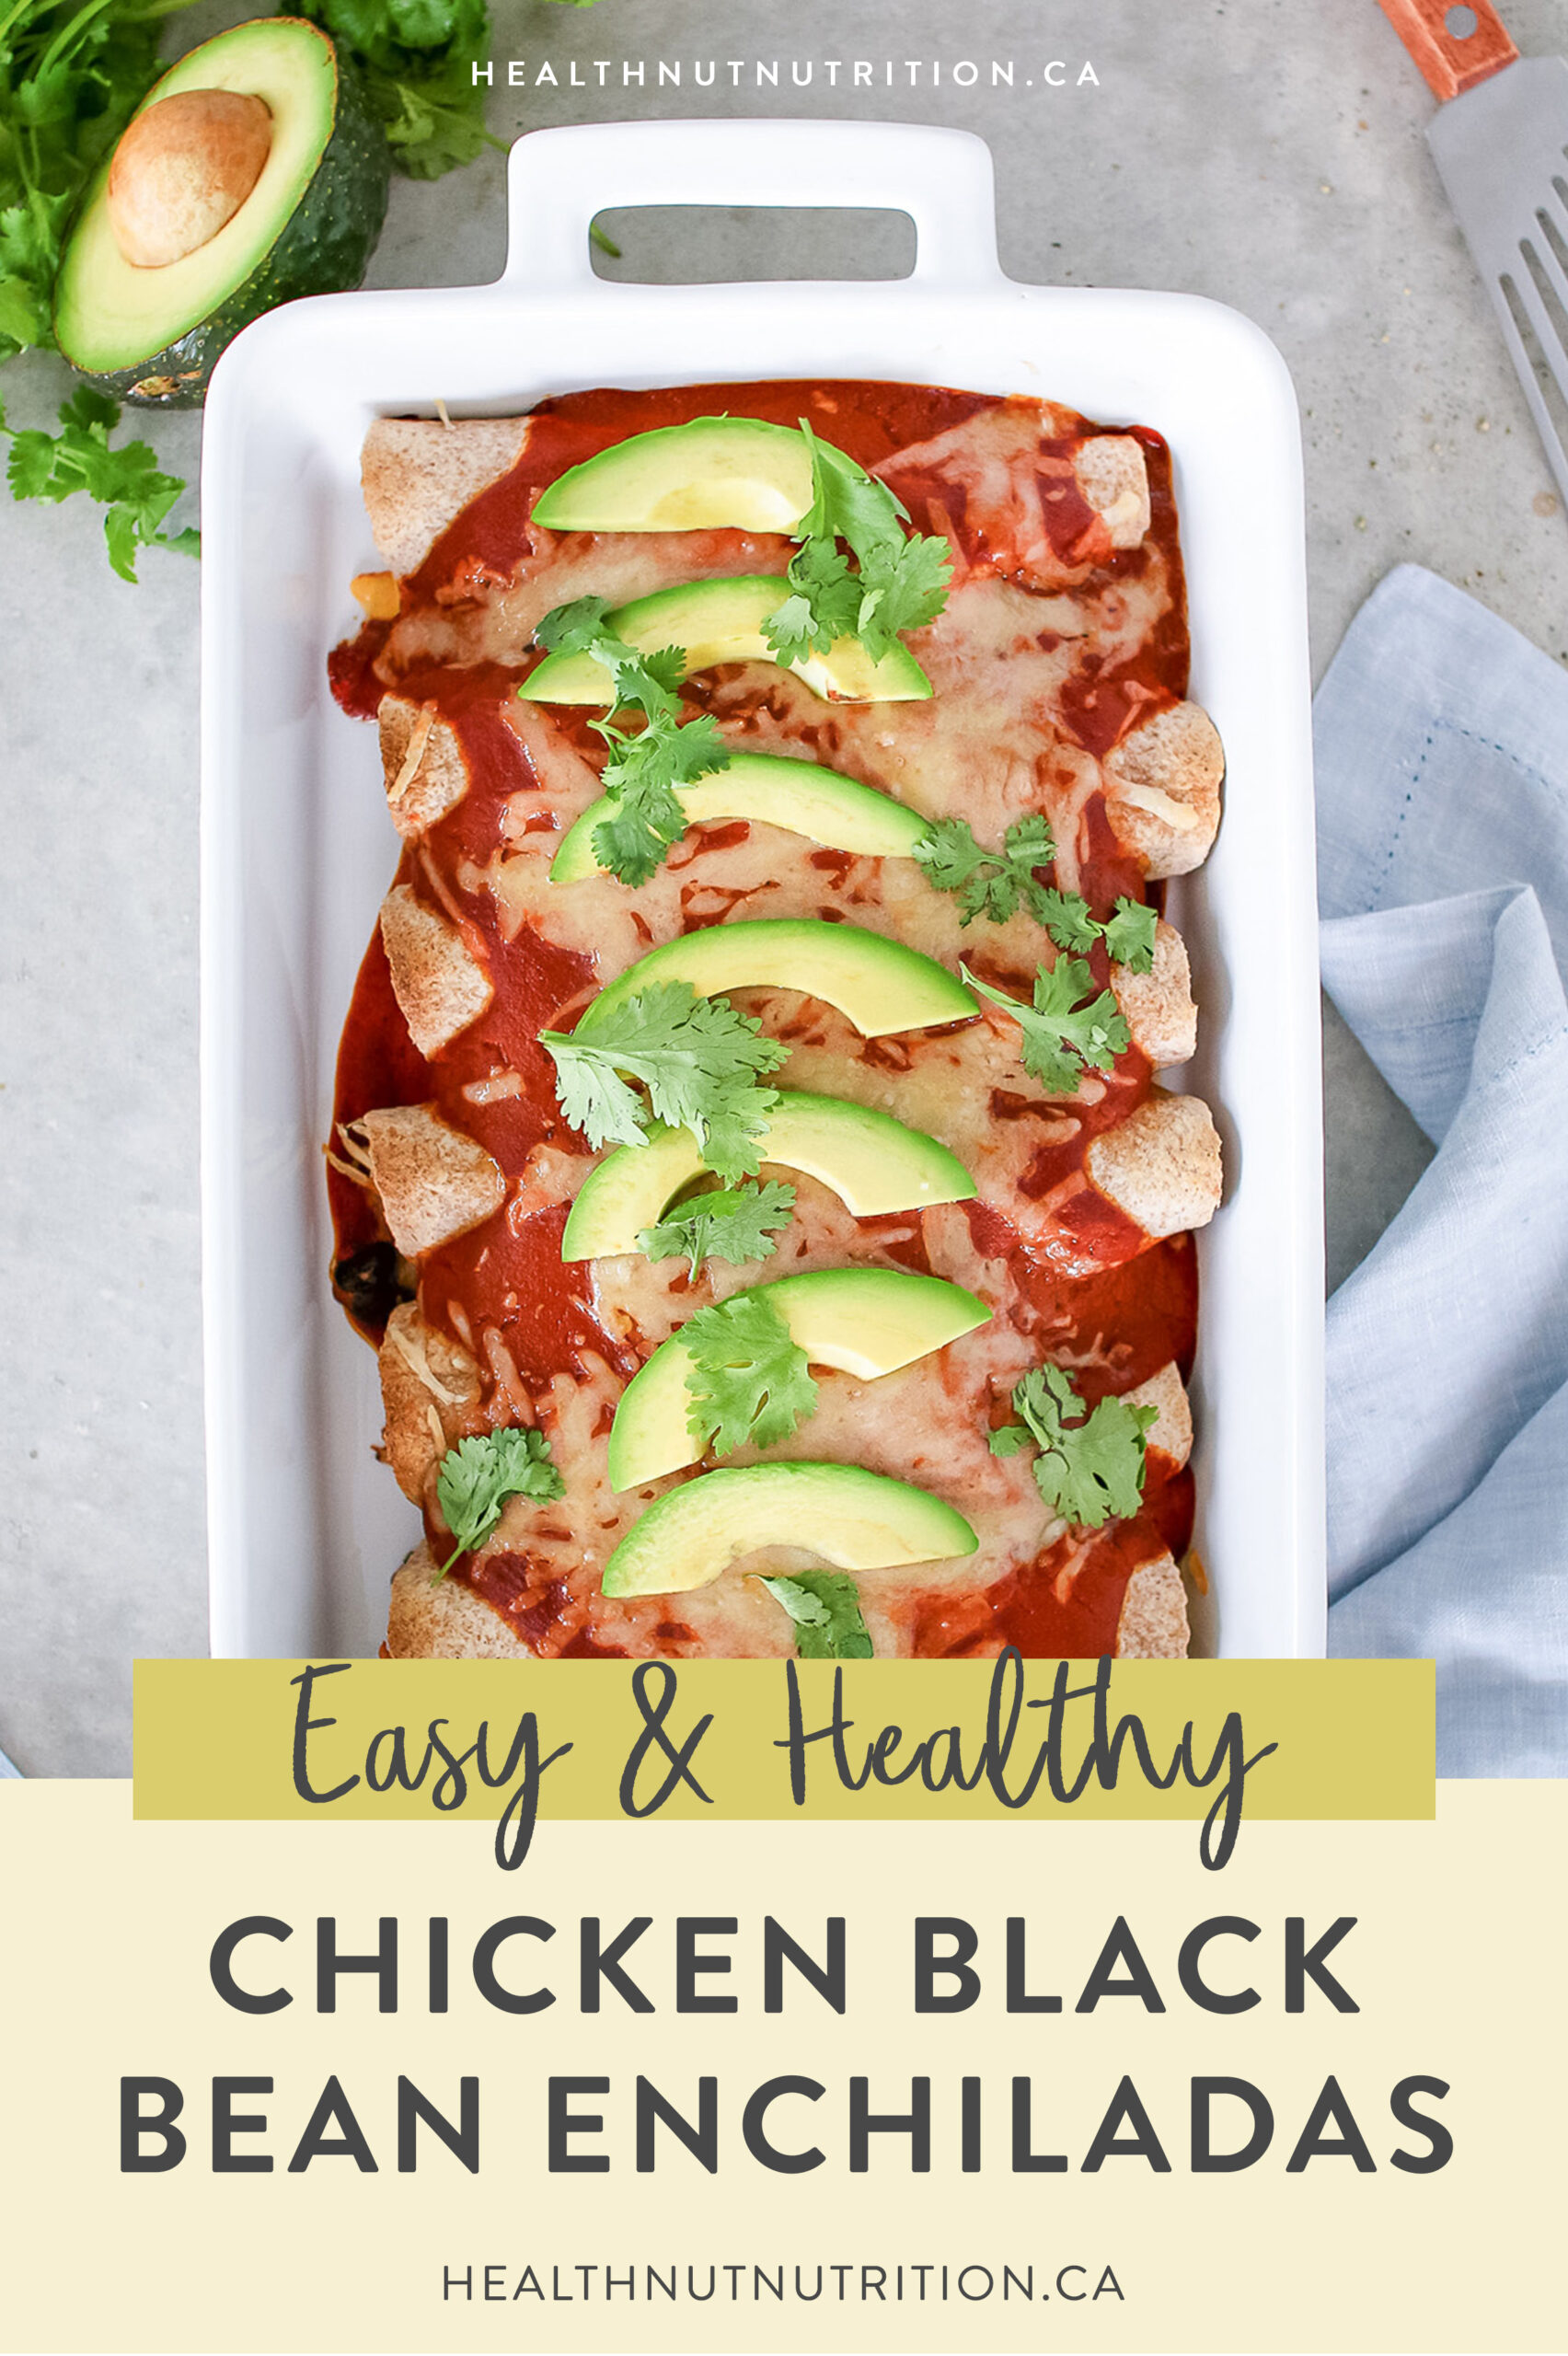 These Mexican inspired Chicken Black Bean Enchiladas are saucy, cheesy and a fun twist on taco Tuesday that will feed your entire family!